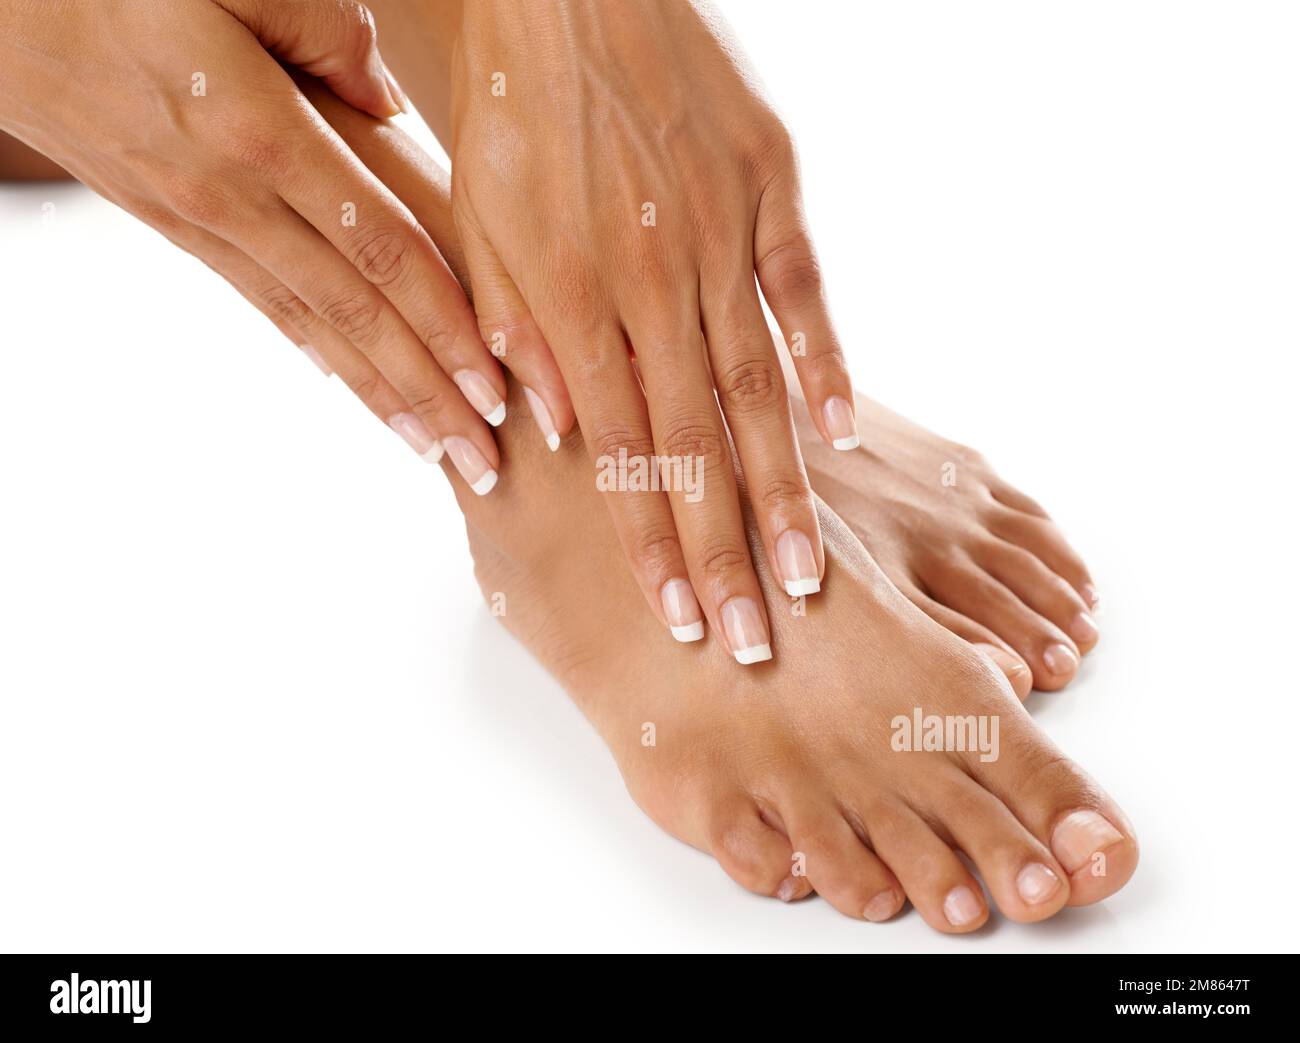 Beautiful hands and feet nail Stock Photo free download